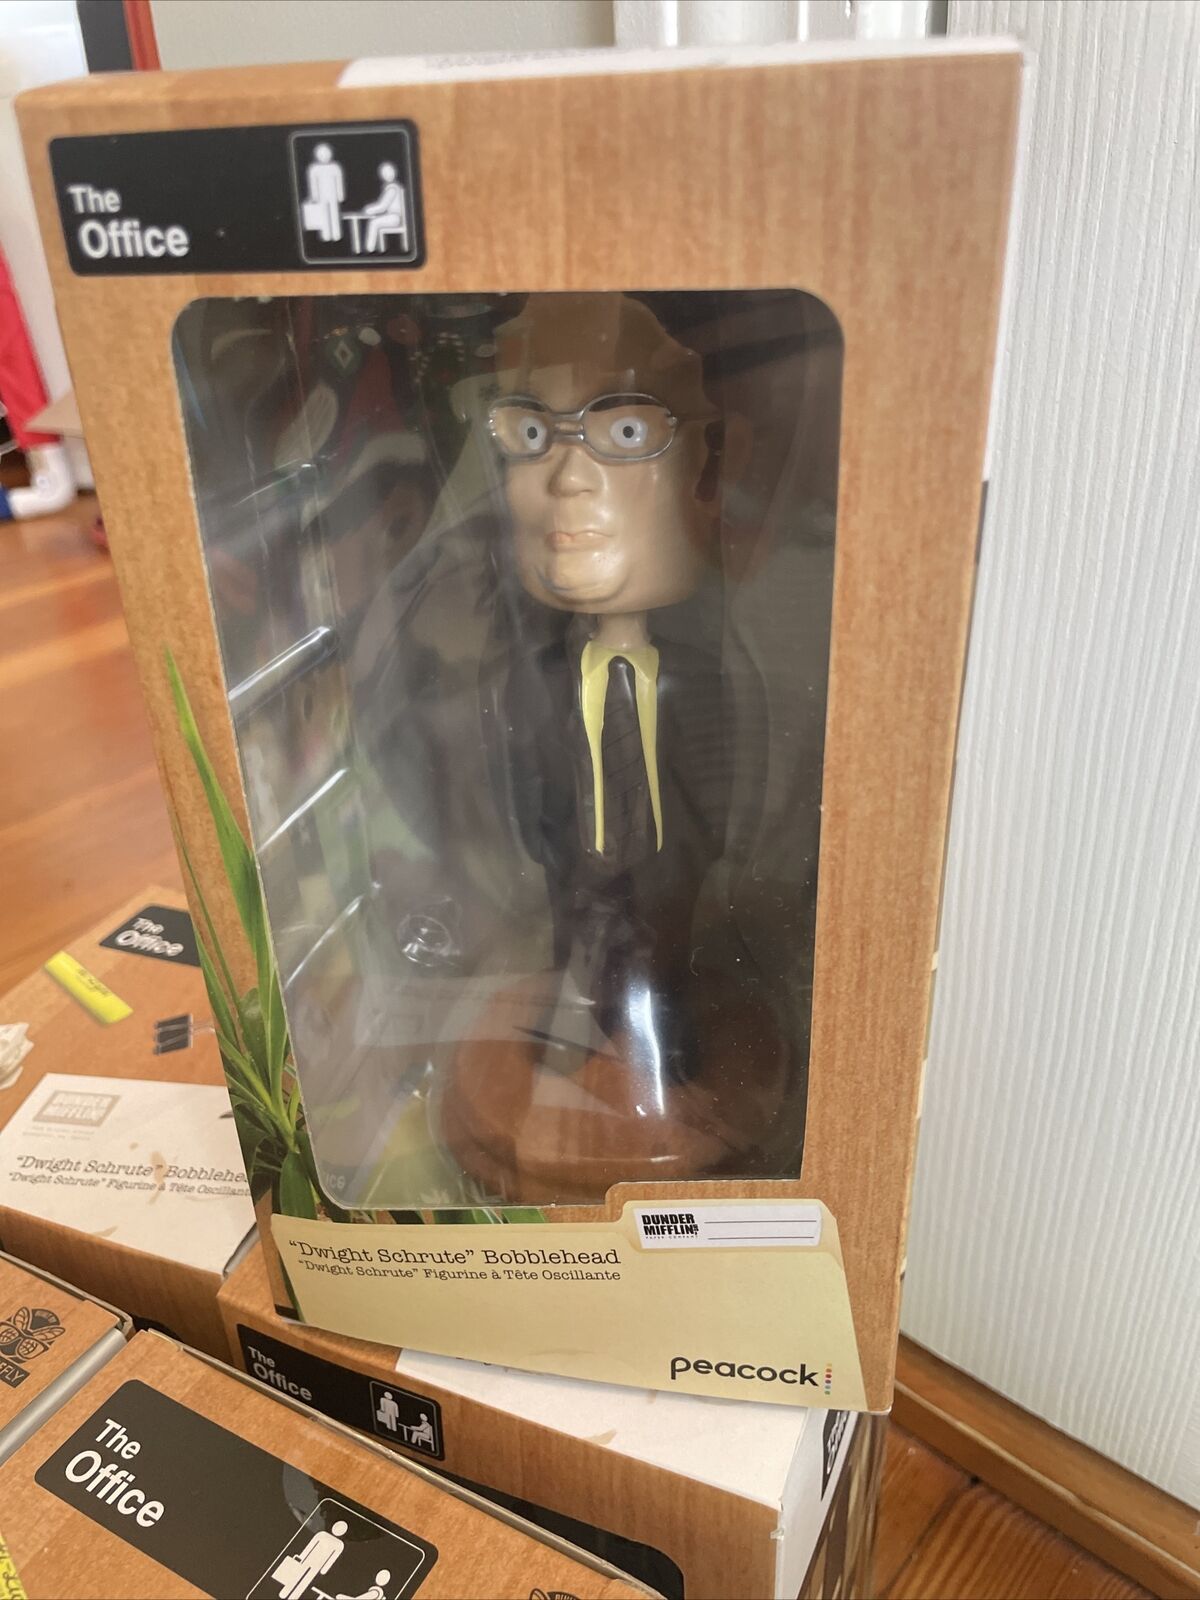 The Office Dwight Schrute Bobblehead Figure Collectible Peacock New In Box